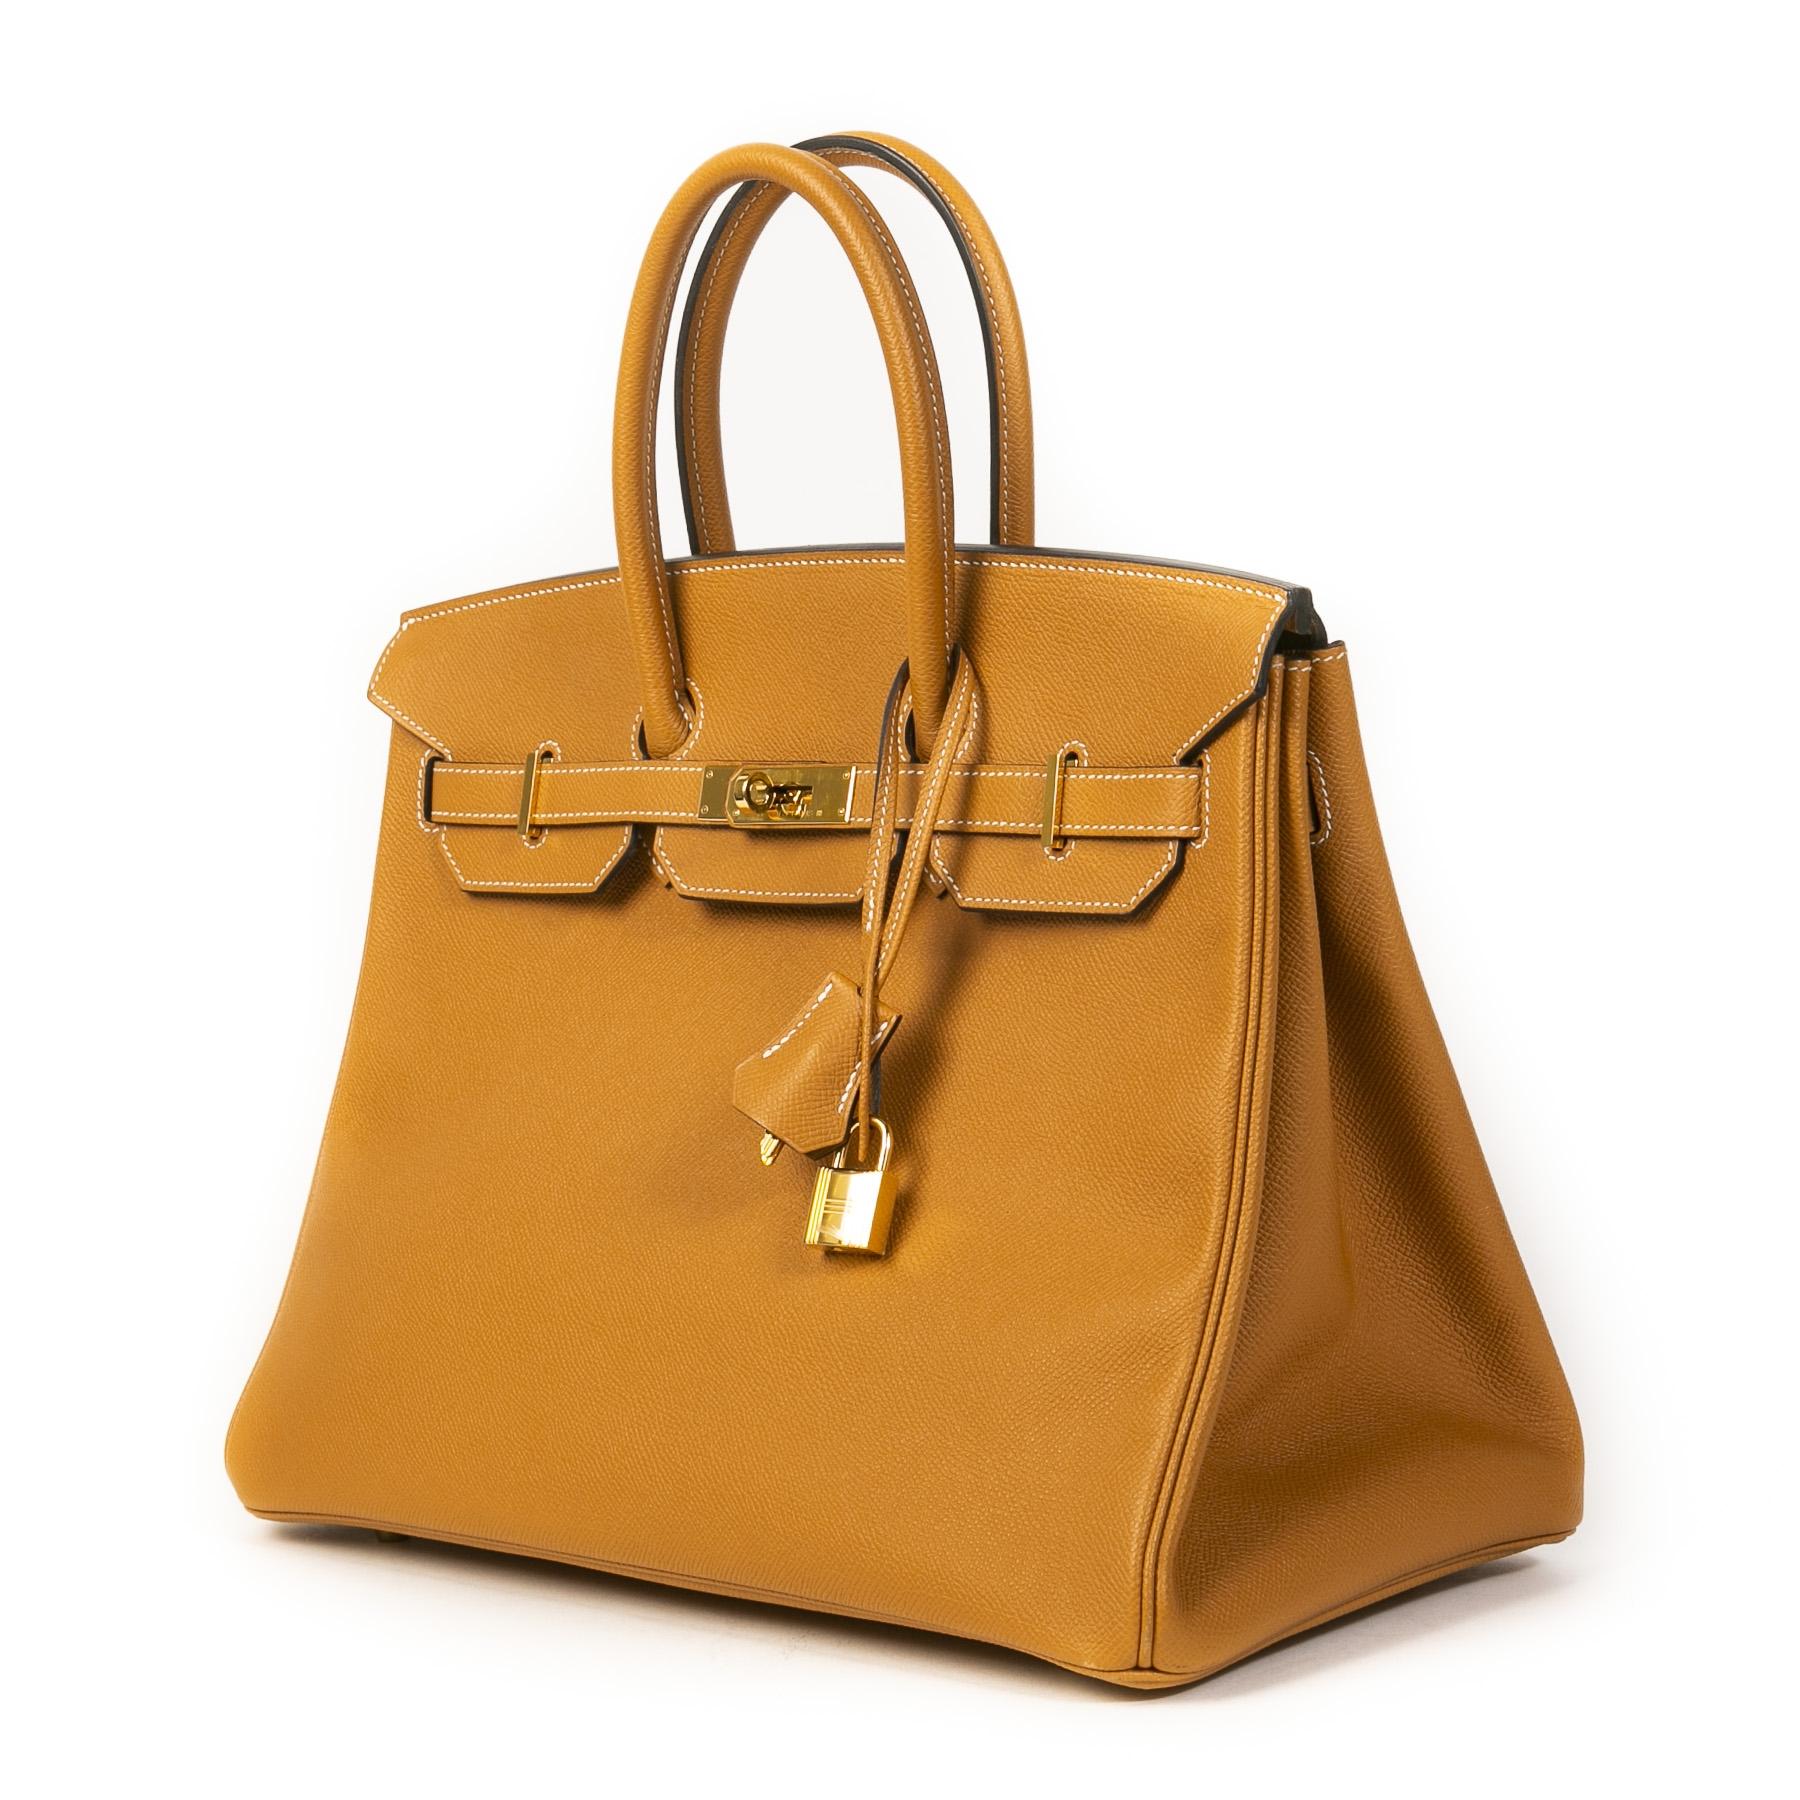 The Hermès Birkin bag is known worldwide to be the most exclusive and luxurious bag - carrying a Birkin bag has become a symbol of luxury around the world. Treat yourself or your loved one to this iconic Hermès bag today!

This beautiful design is